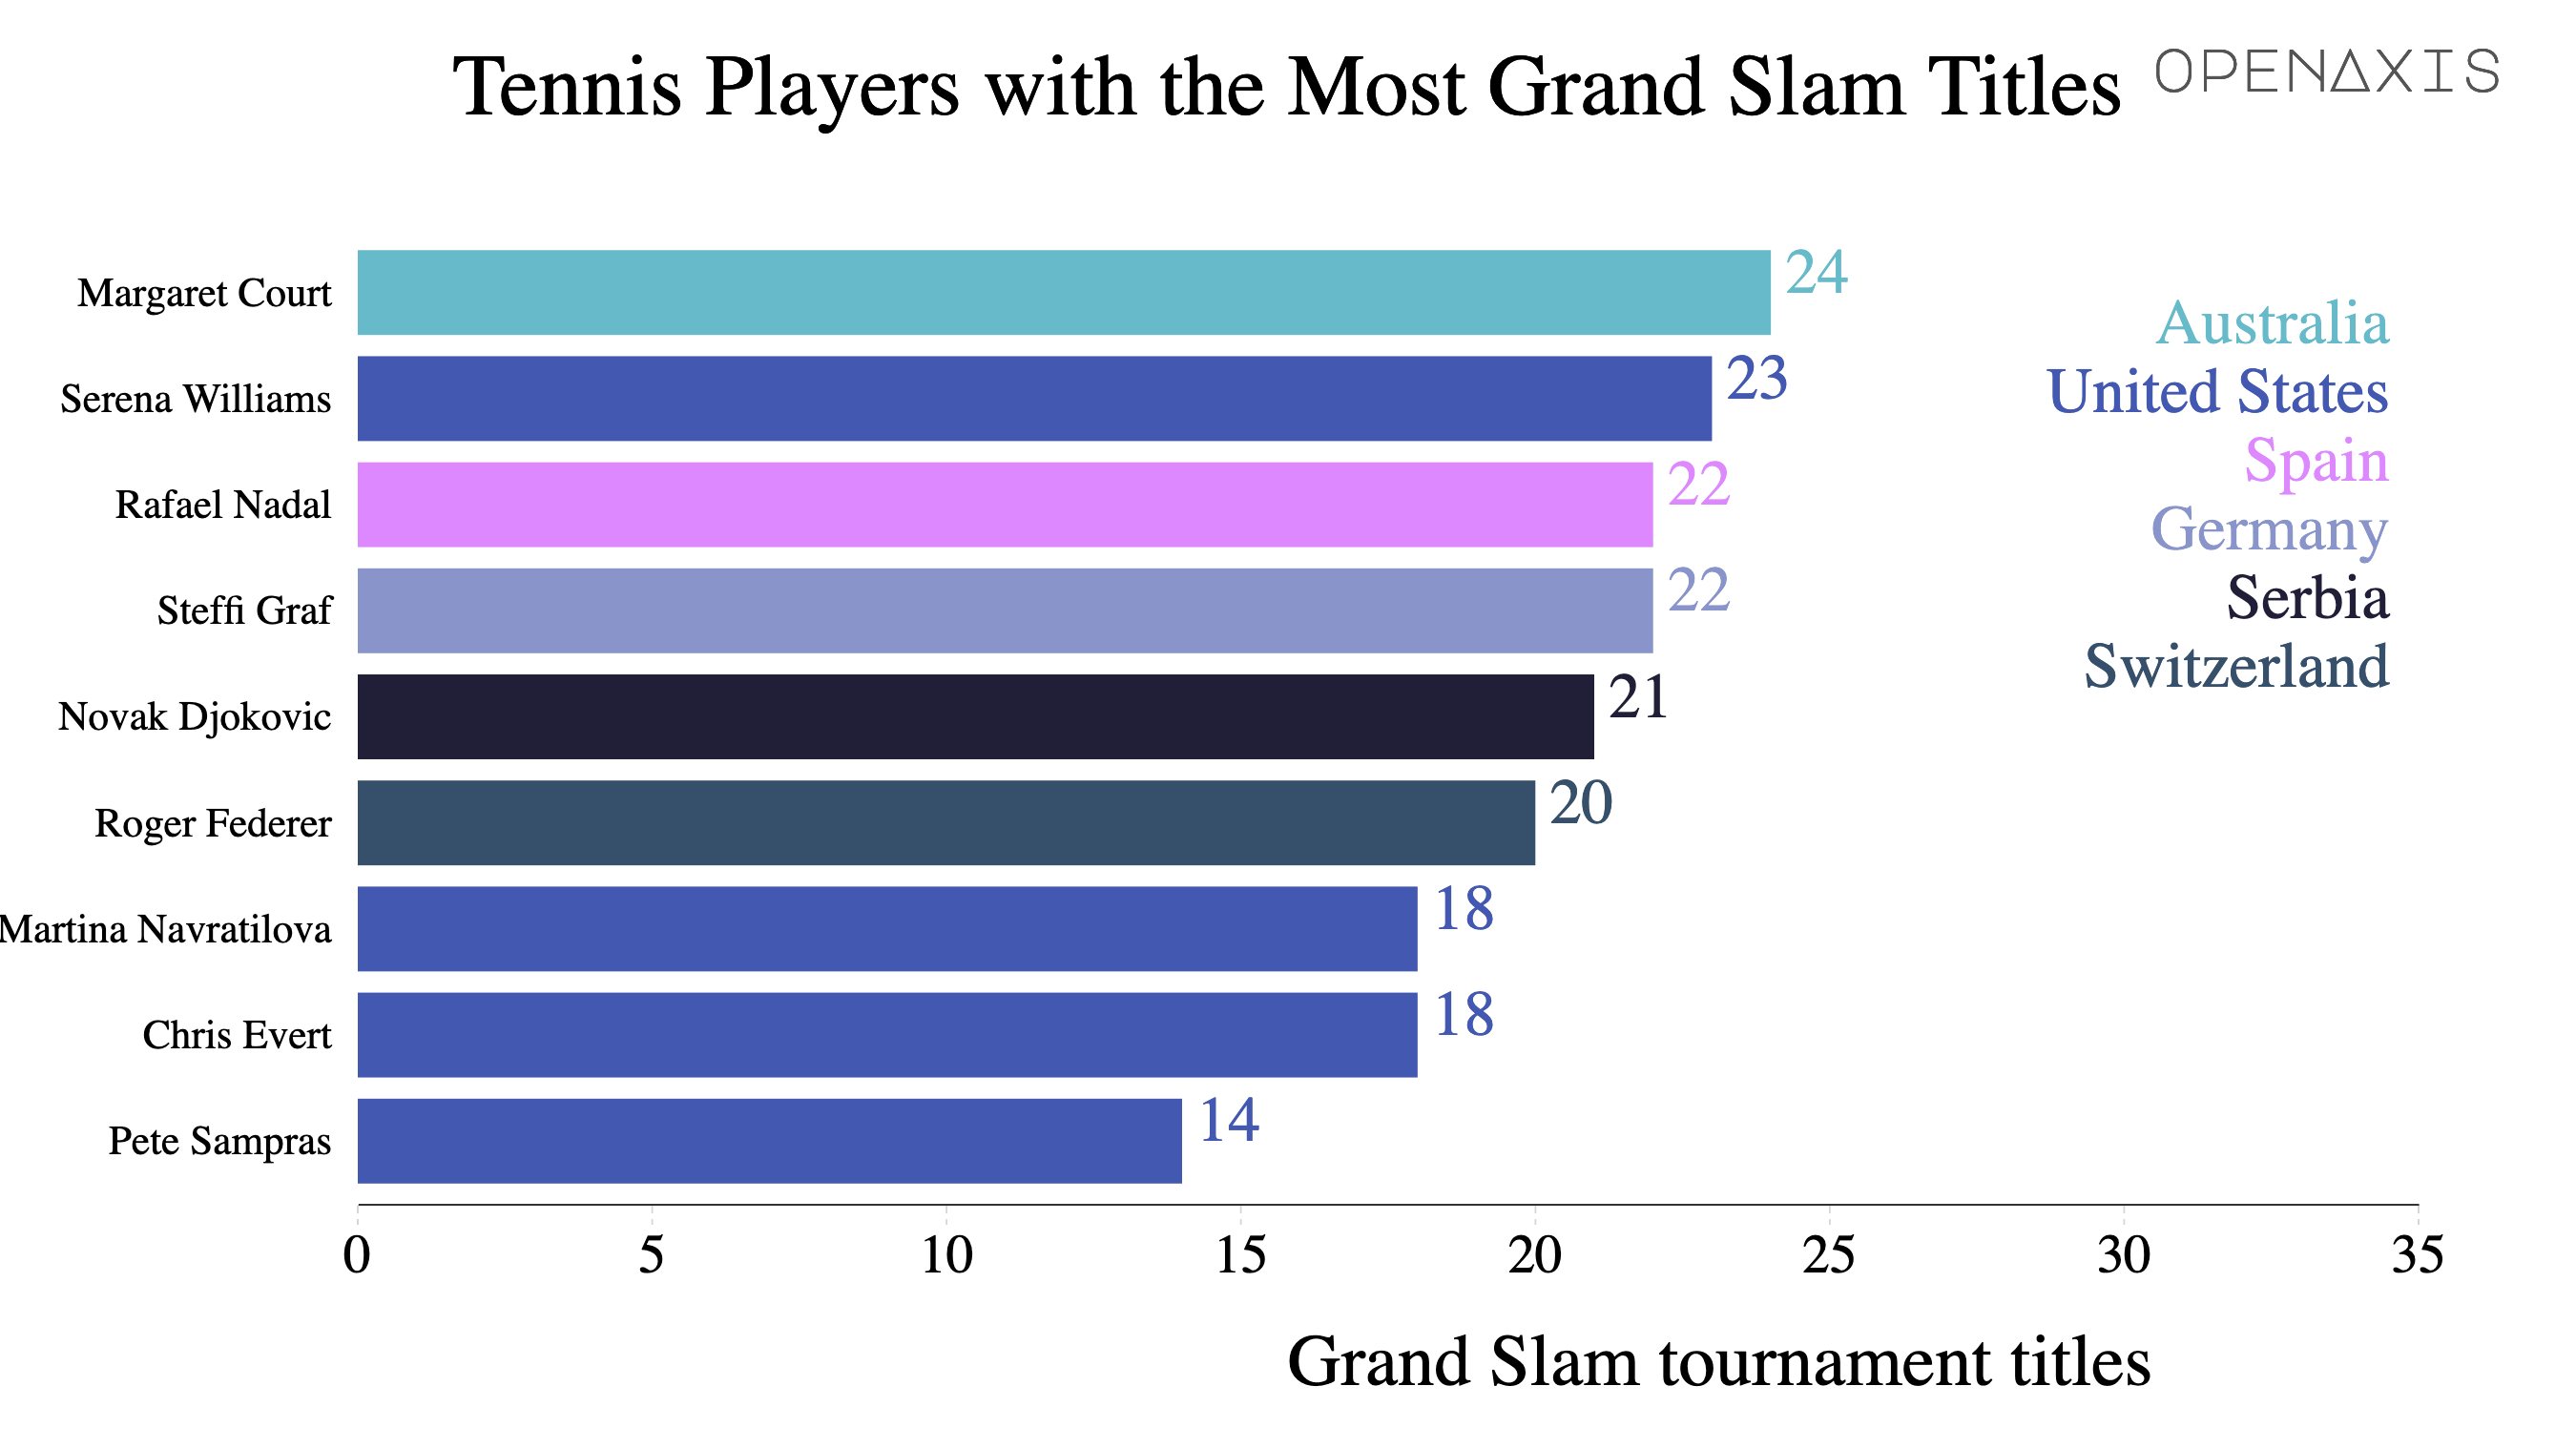 "Tennis Players with the Most Grand Slam Titles"